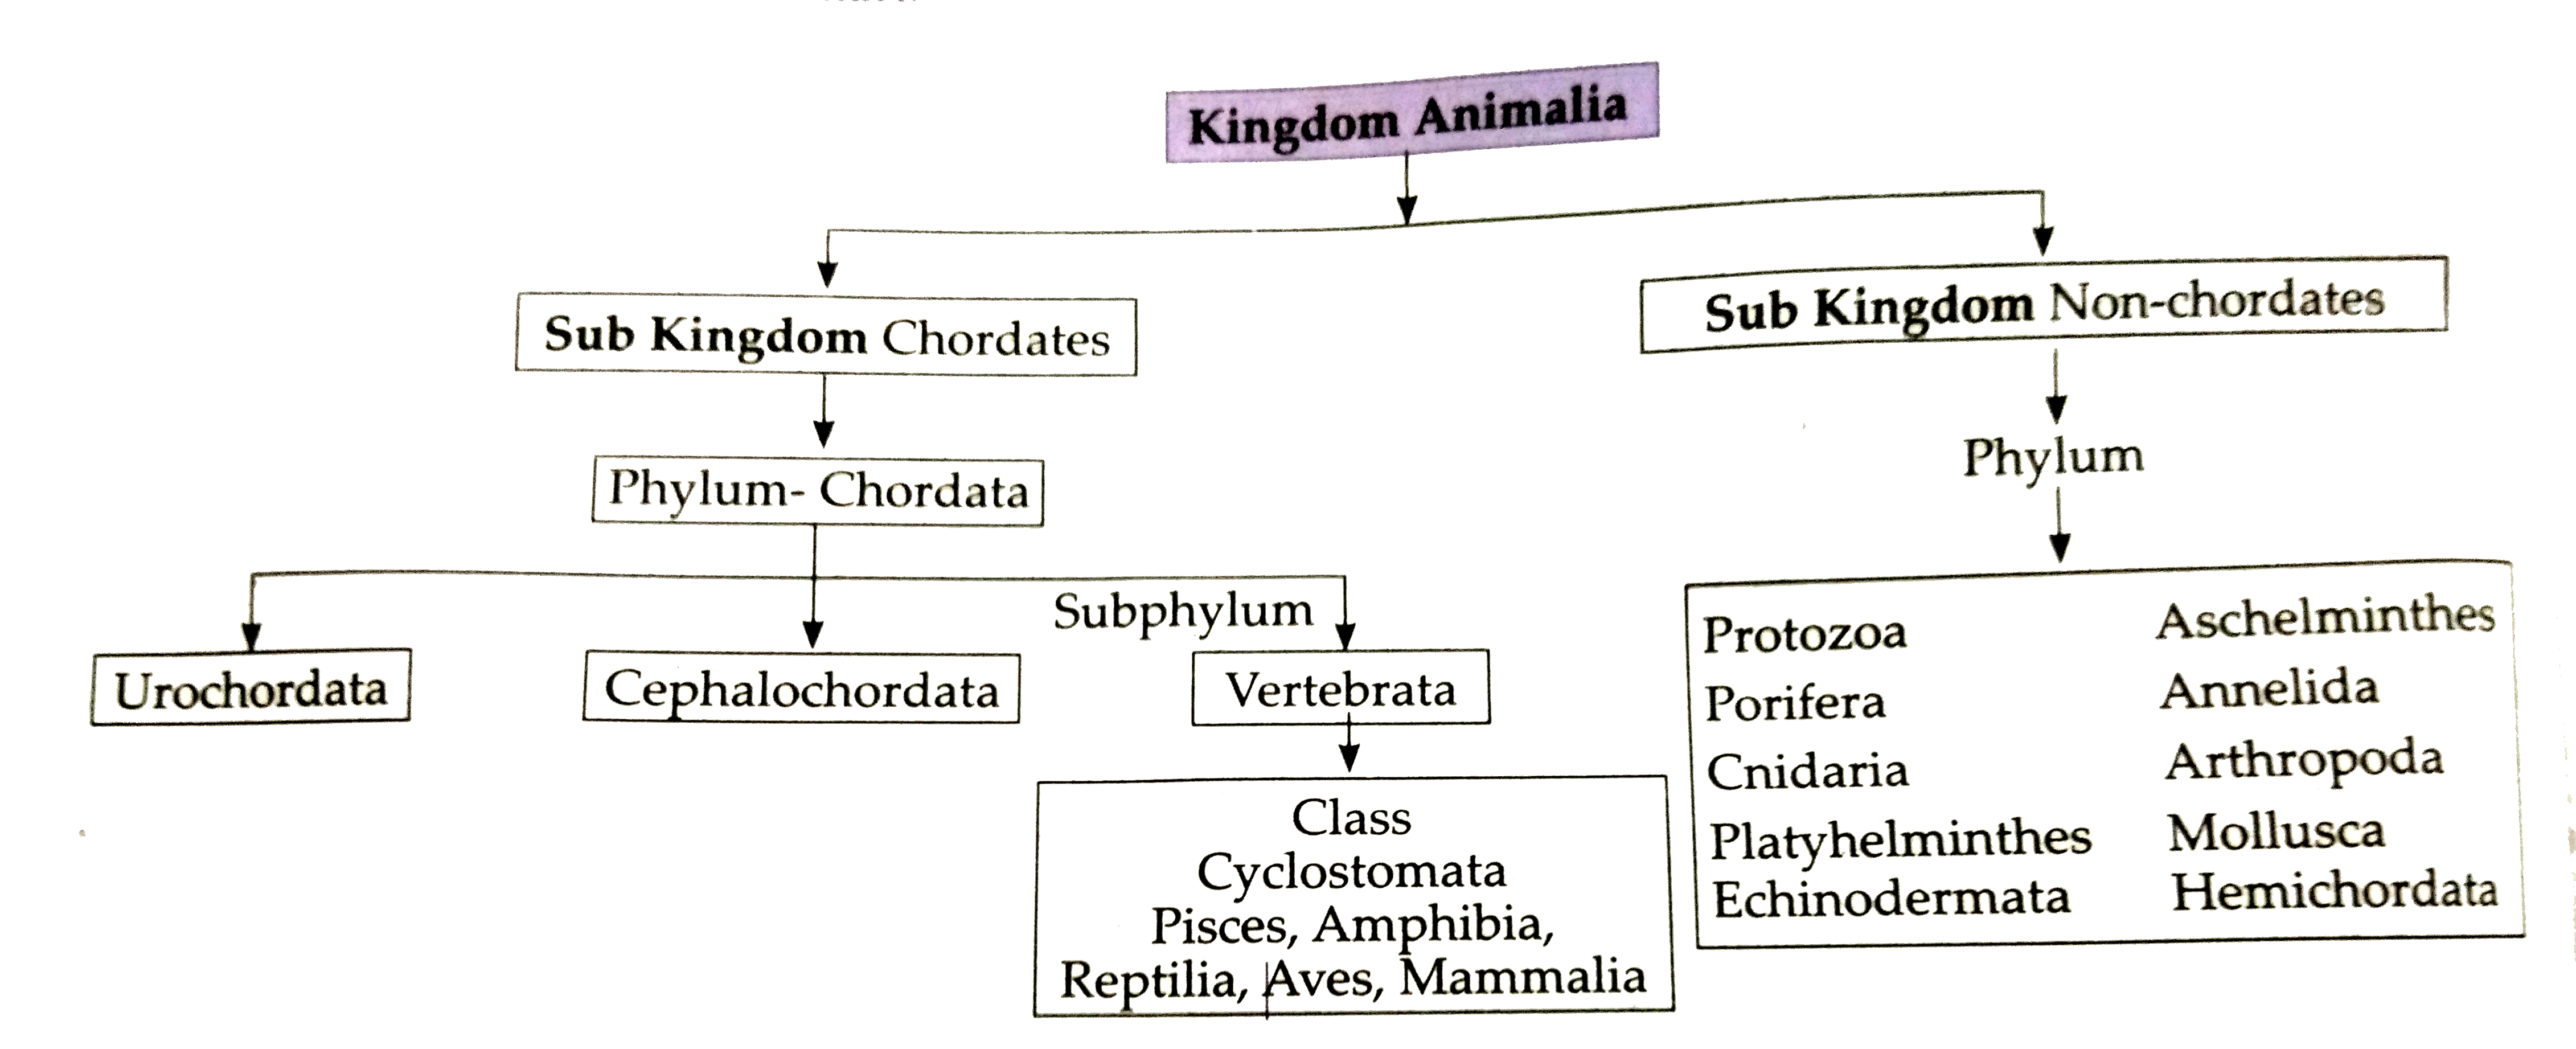 Conventional system of Animal classification